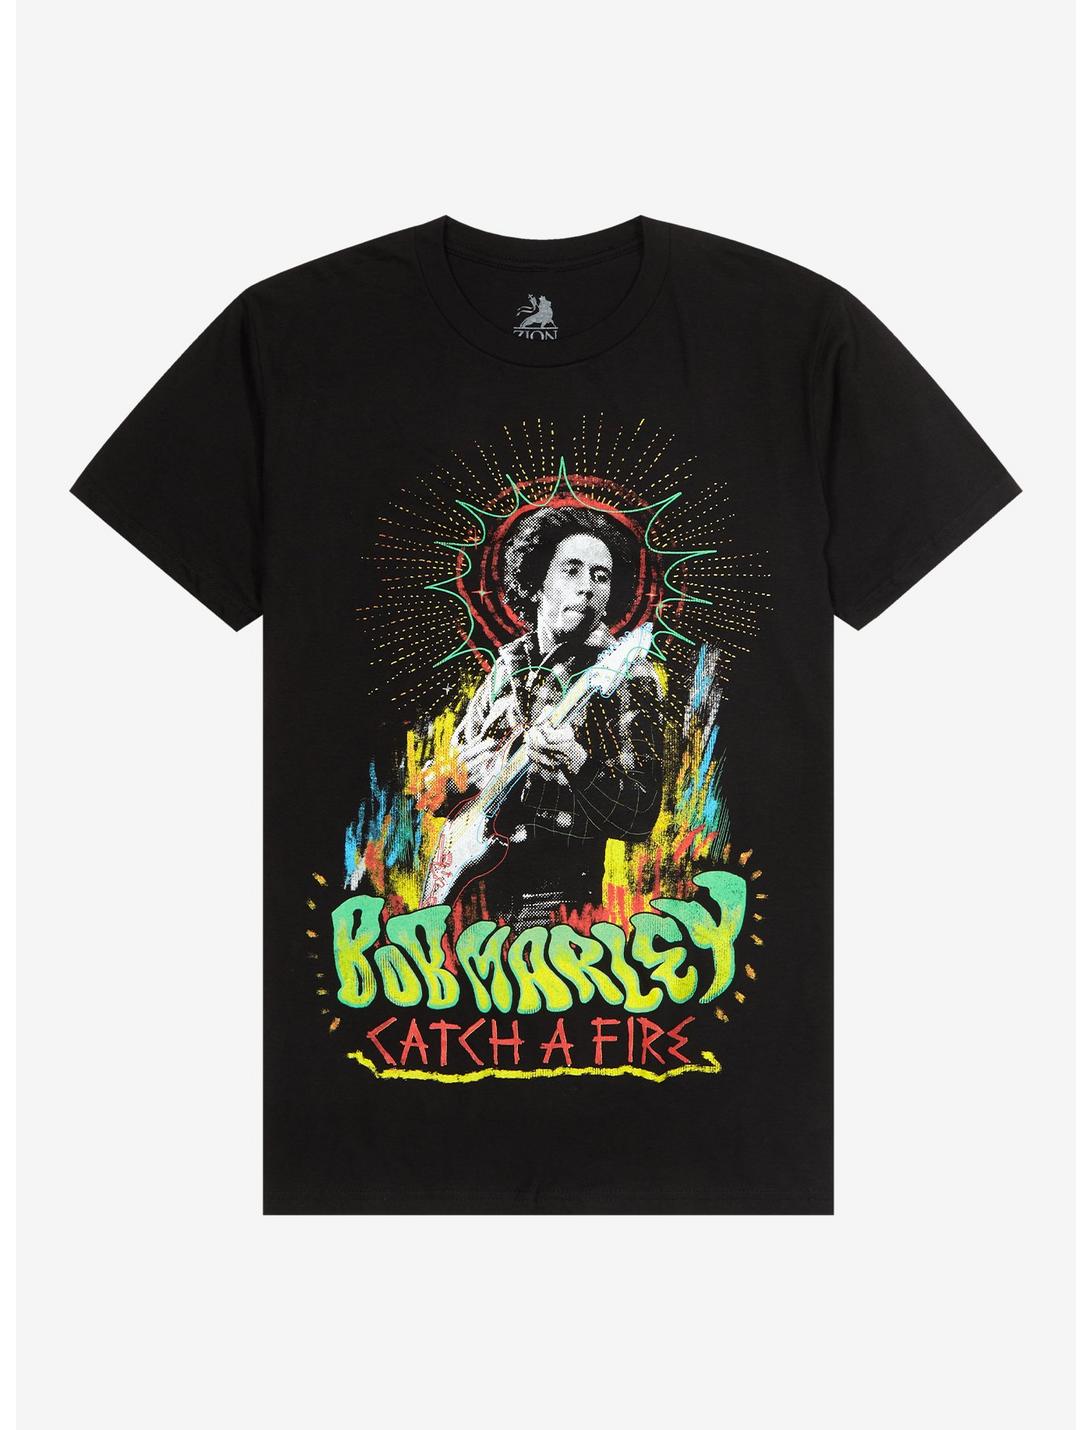 Bob Marley And The Wailers Catch A Fire Tracklist T-Shirt, BLACK, hi-res